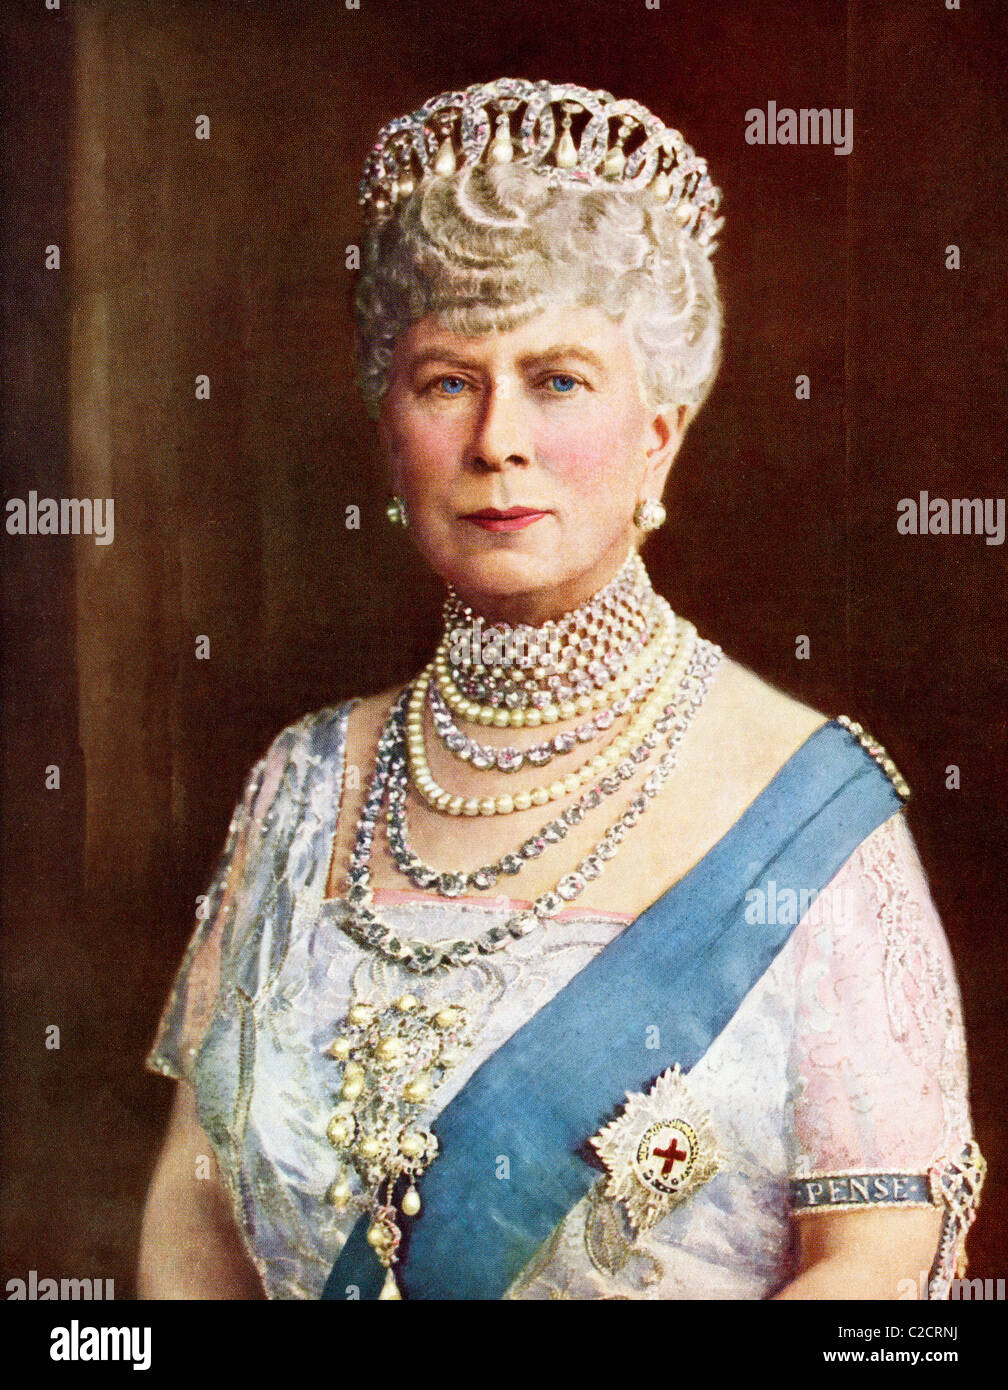 queen-mary-consort-of-king-george-v-mary-of-teck-victoria-mary-augusta-C2CRNJ.jpg